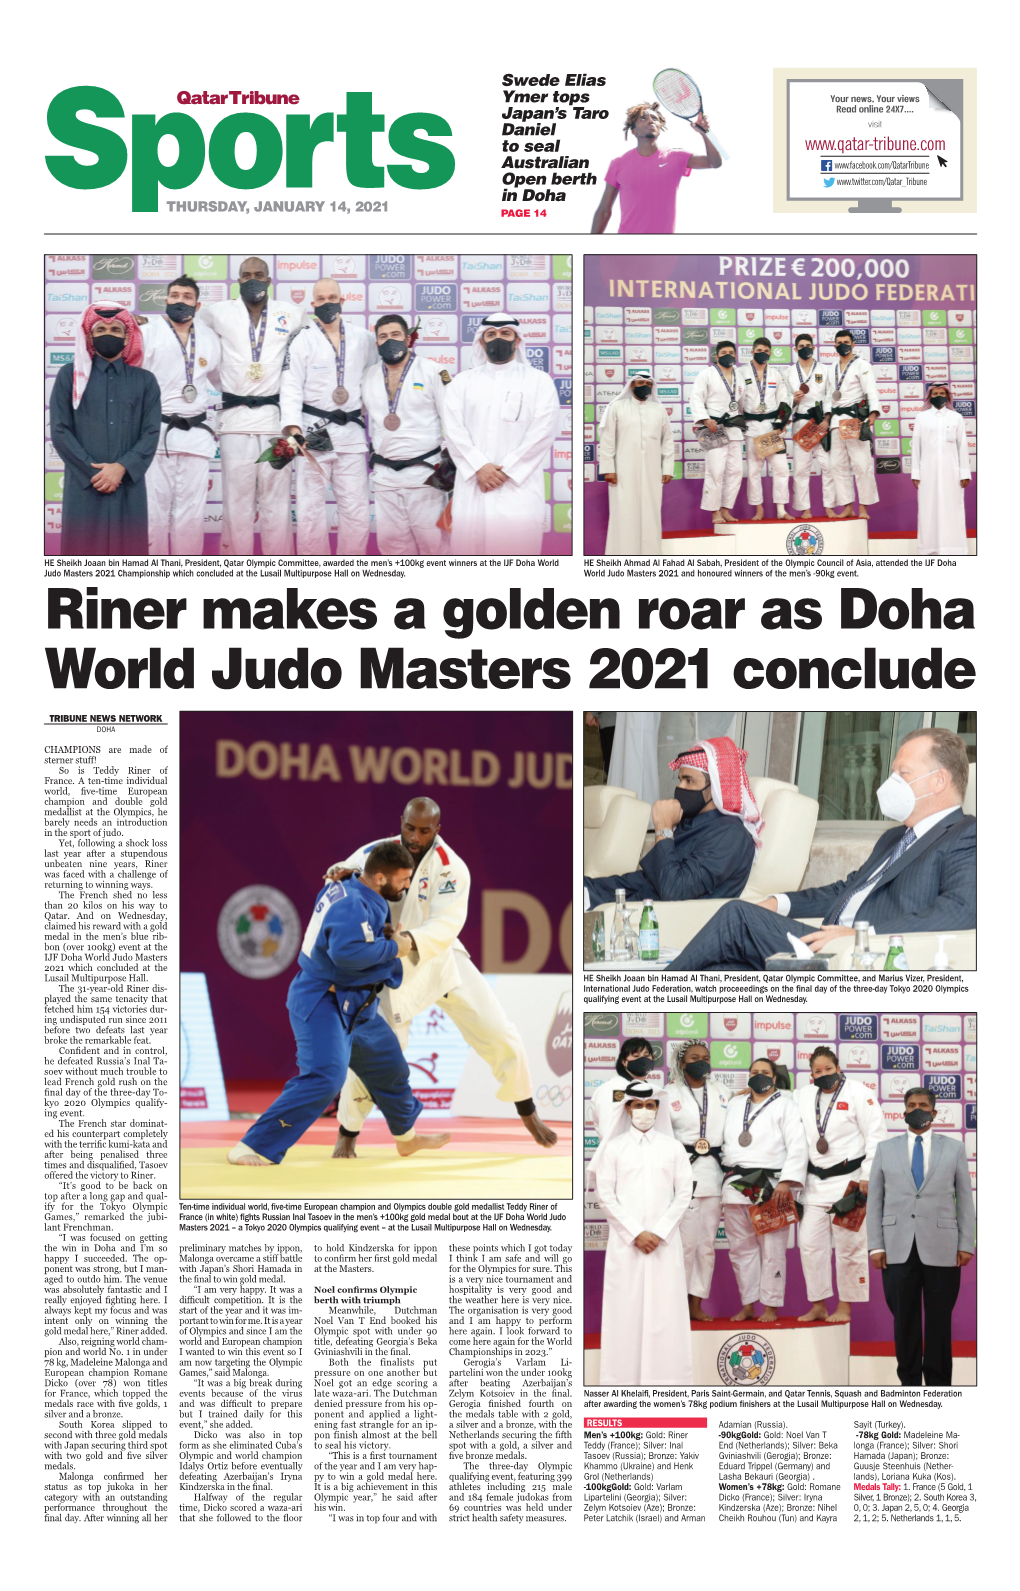 Riner Makes a Golden Roar As Doha World Judo Masters 2021 Conclude